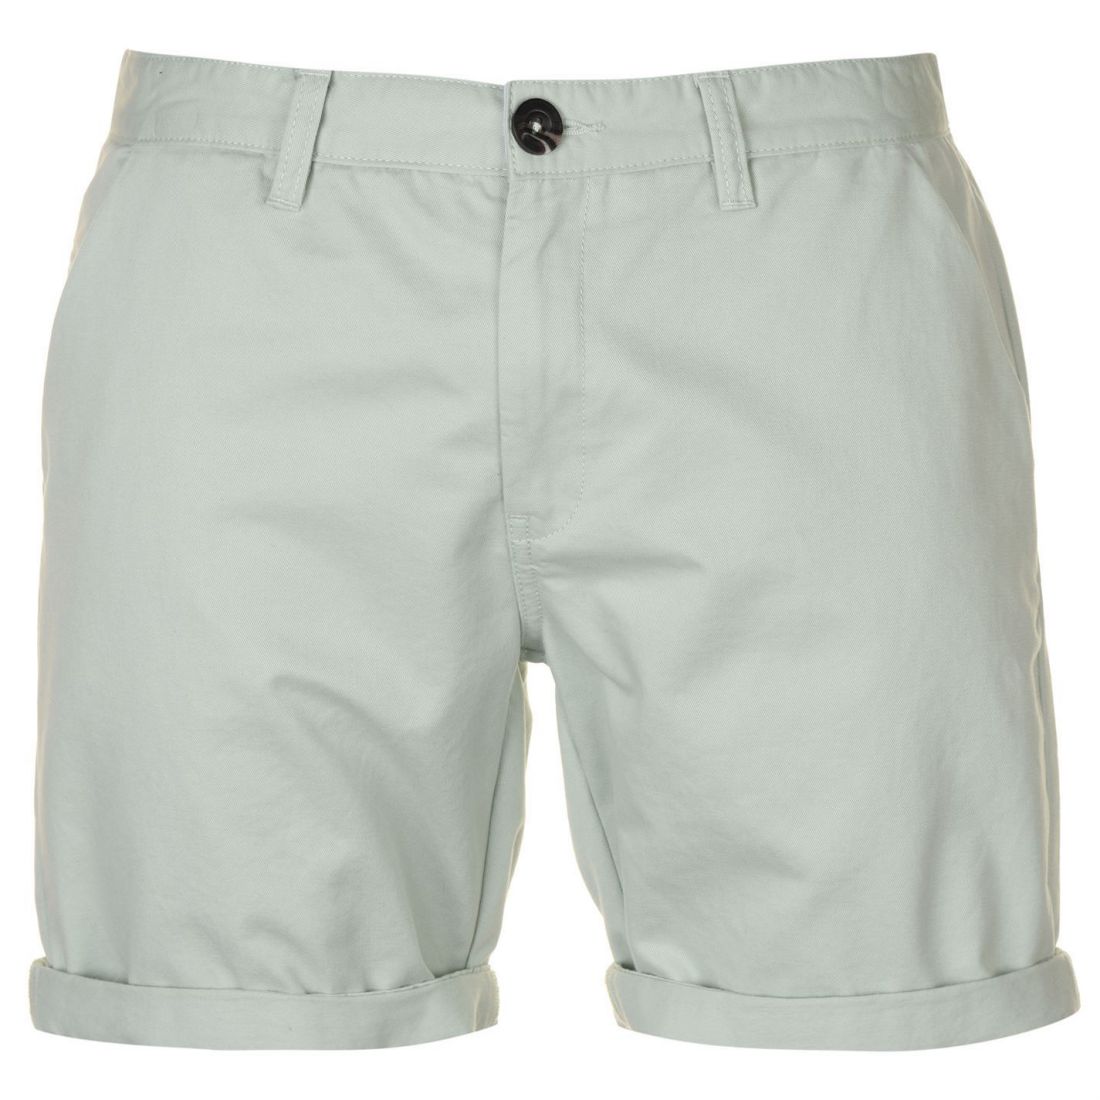 Pierre Cardin Mens Colour Chino Shorts Chinos Trousers Pants Bottoms ...